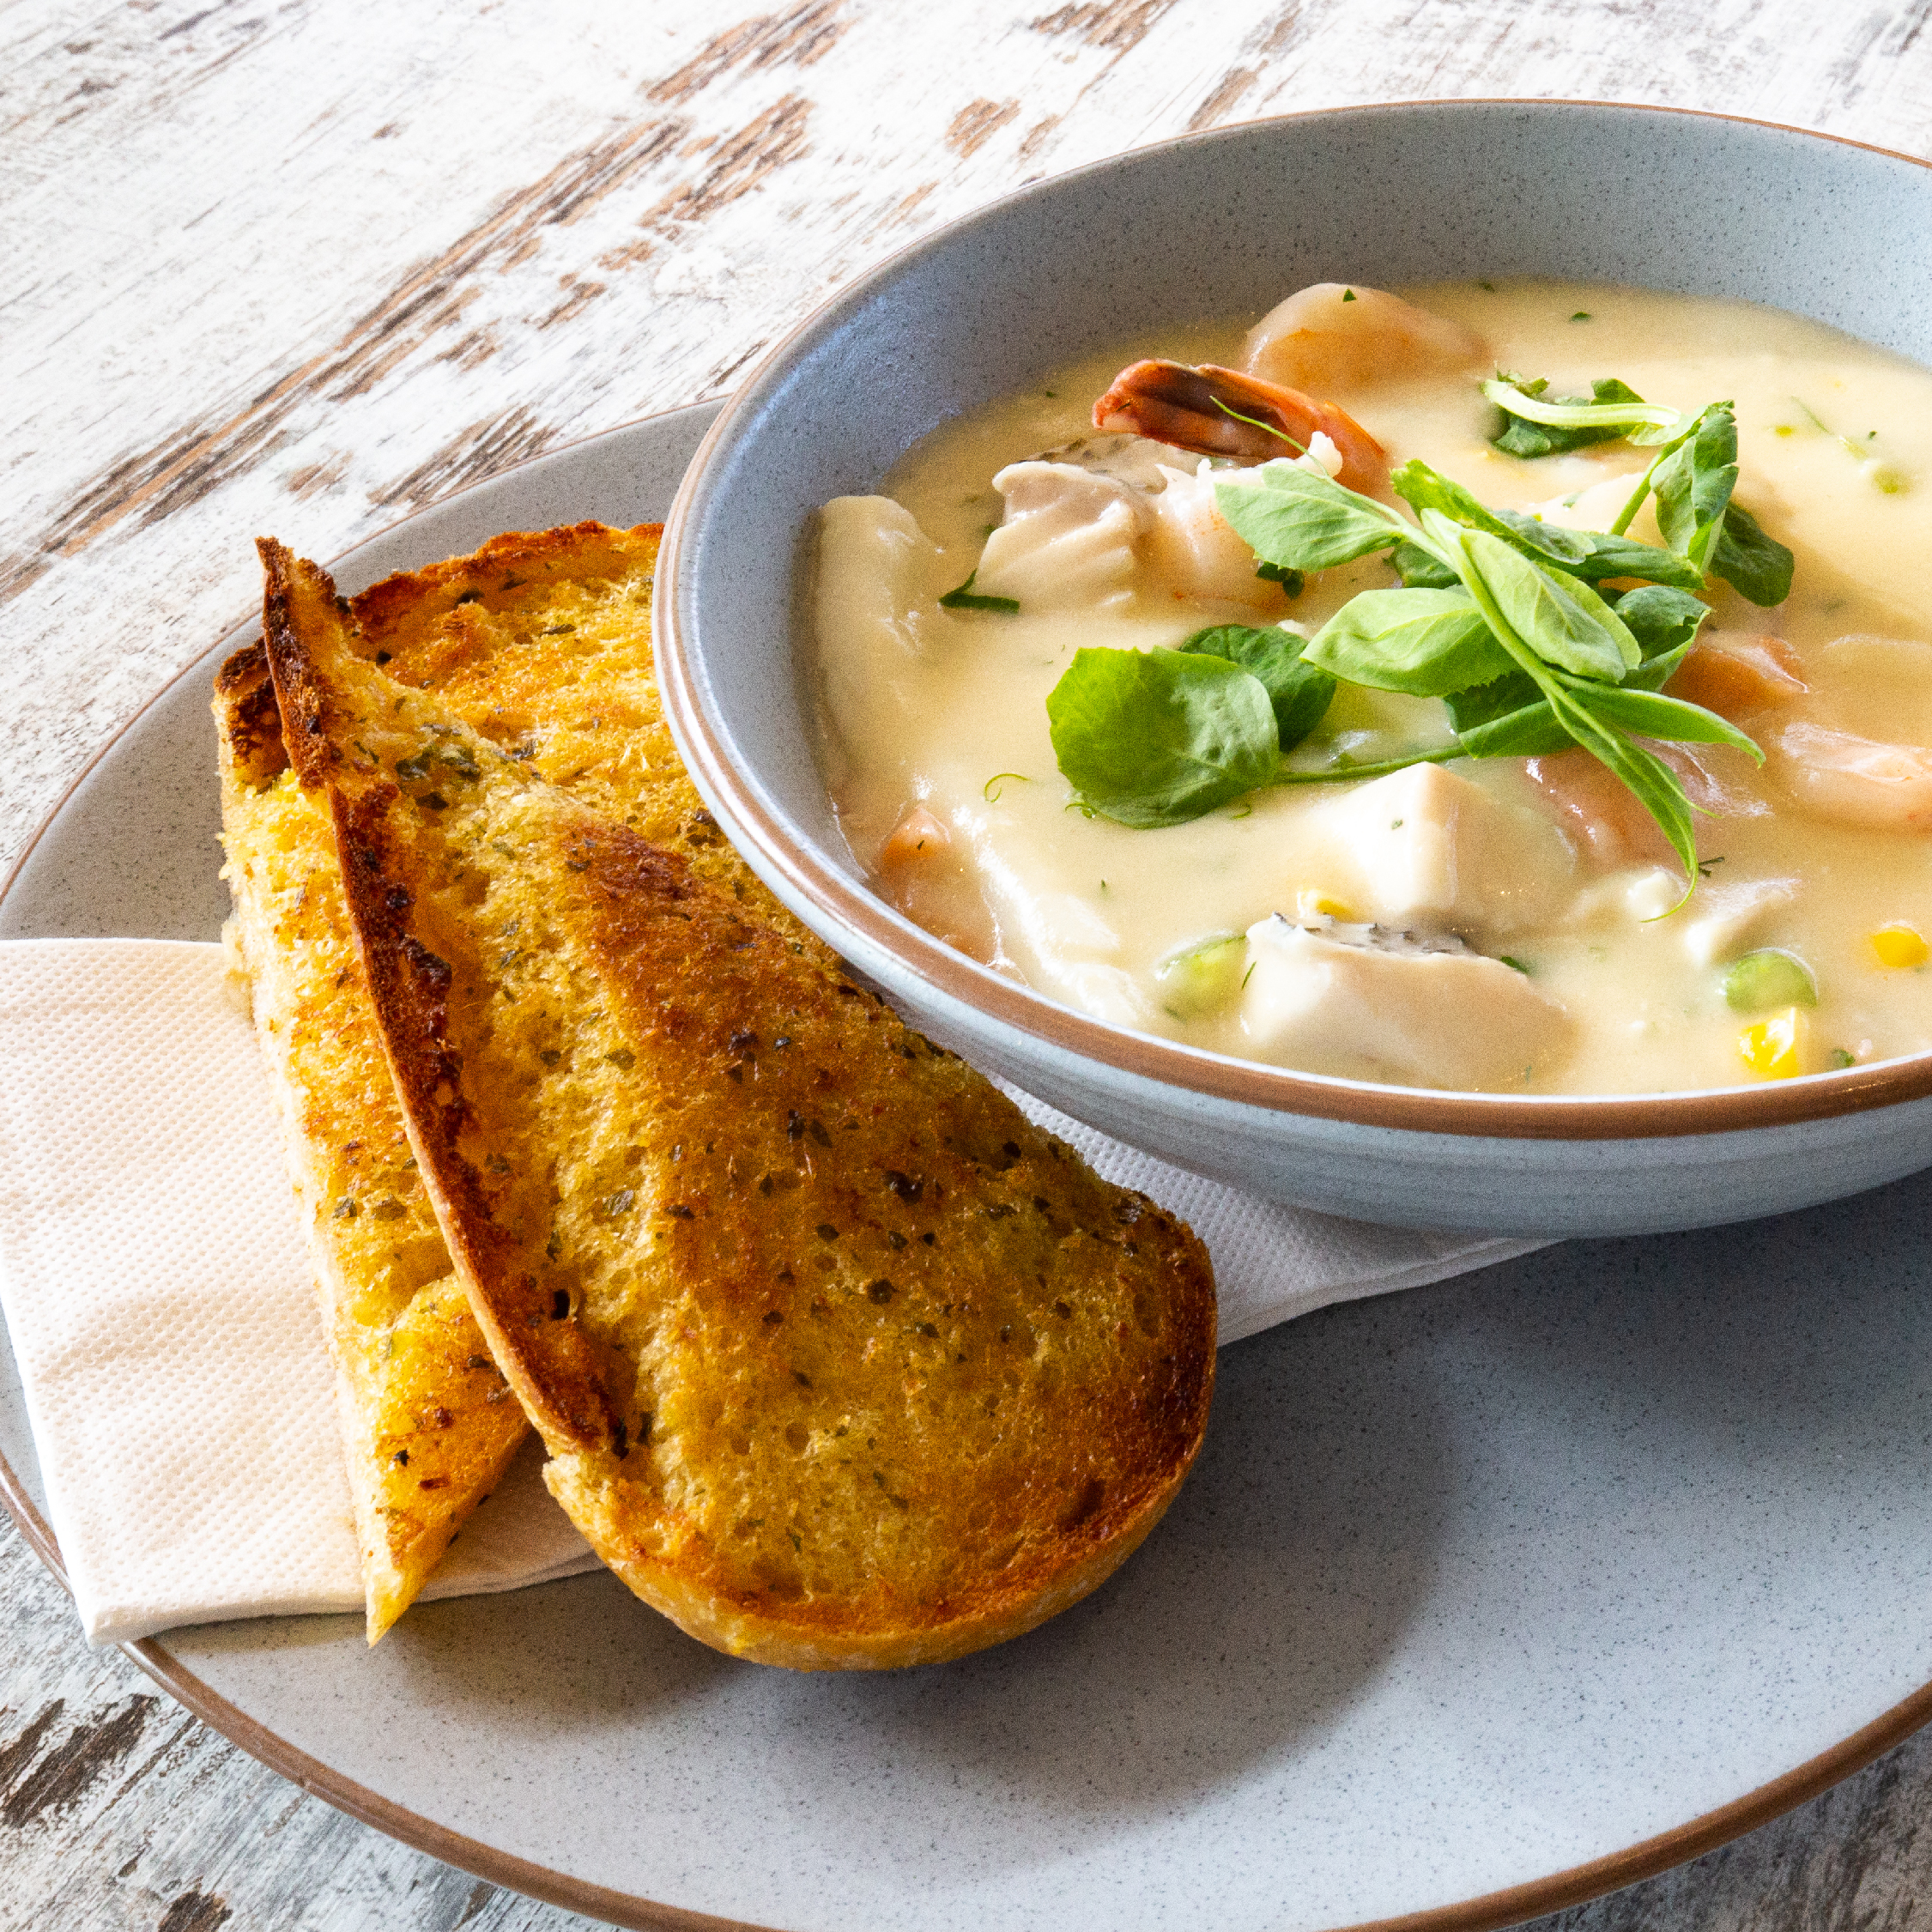 Meal Special: Seafood Chowder